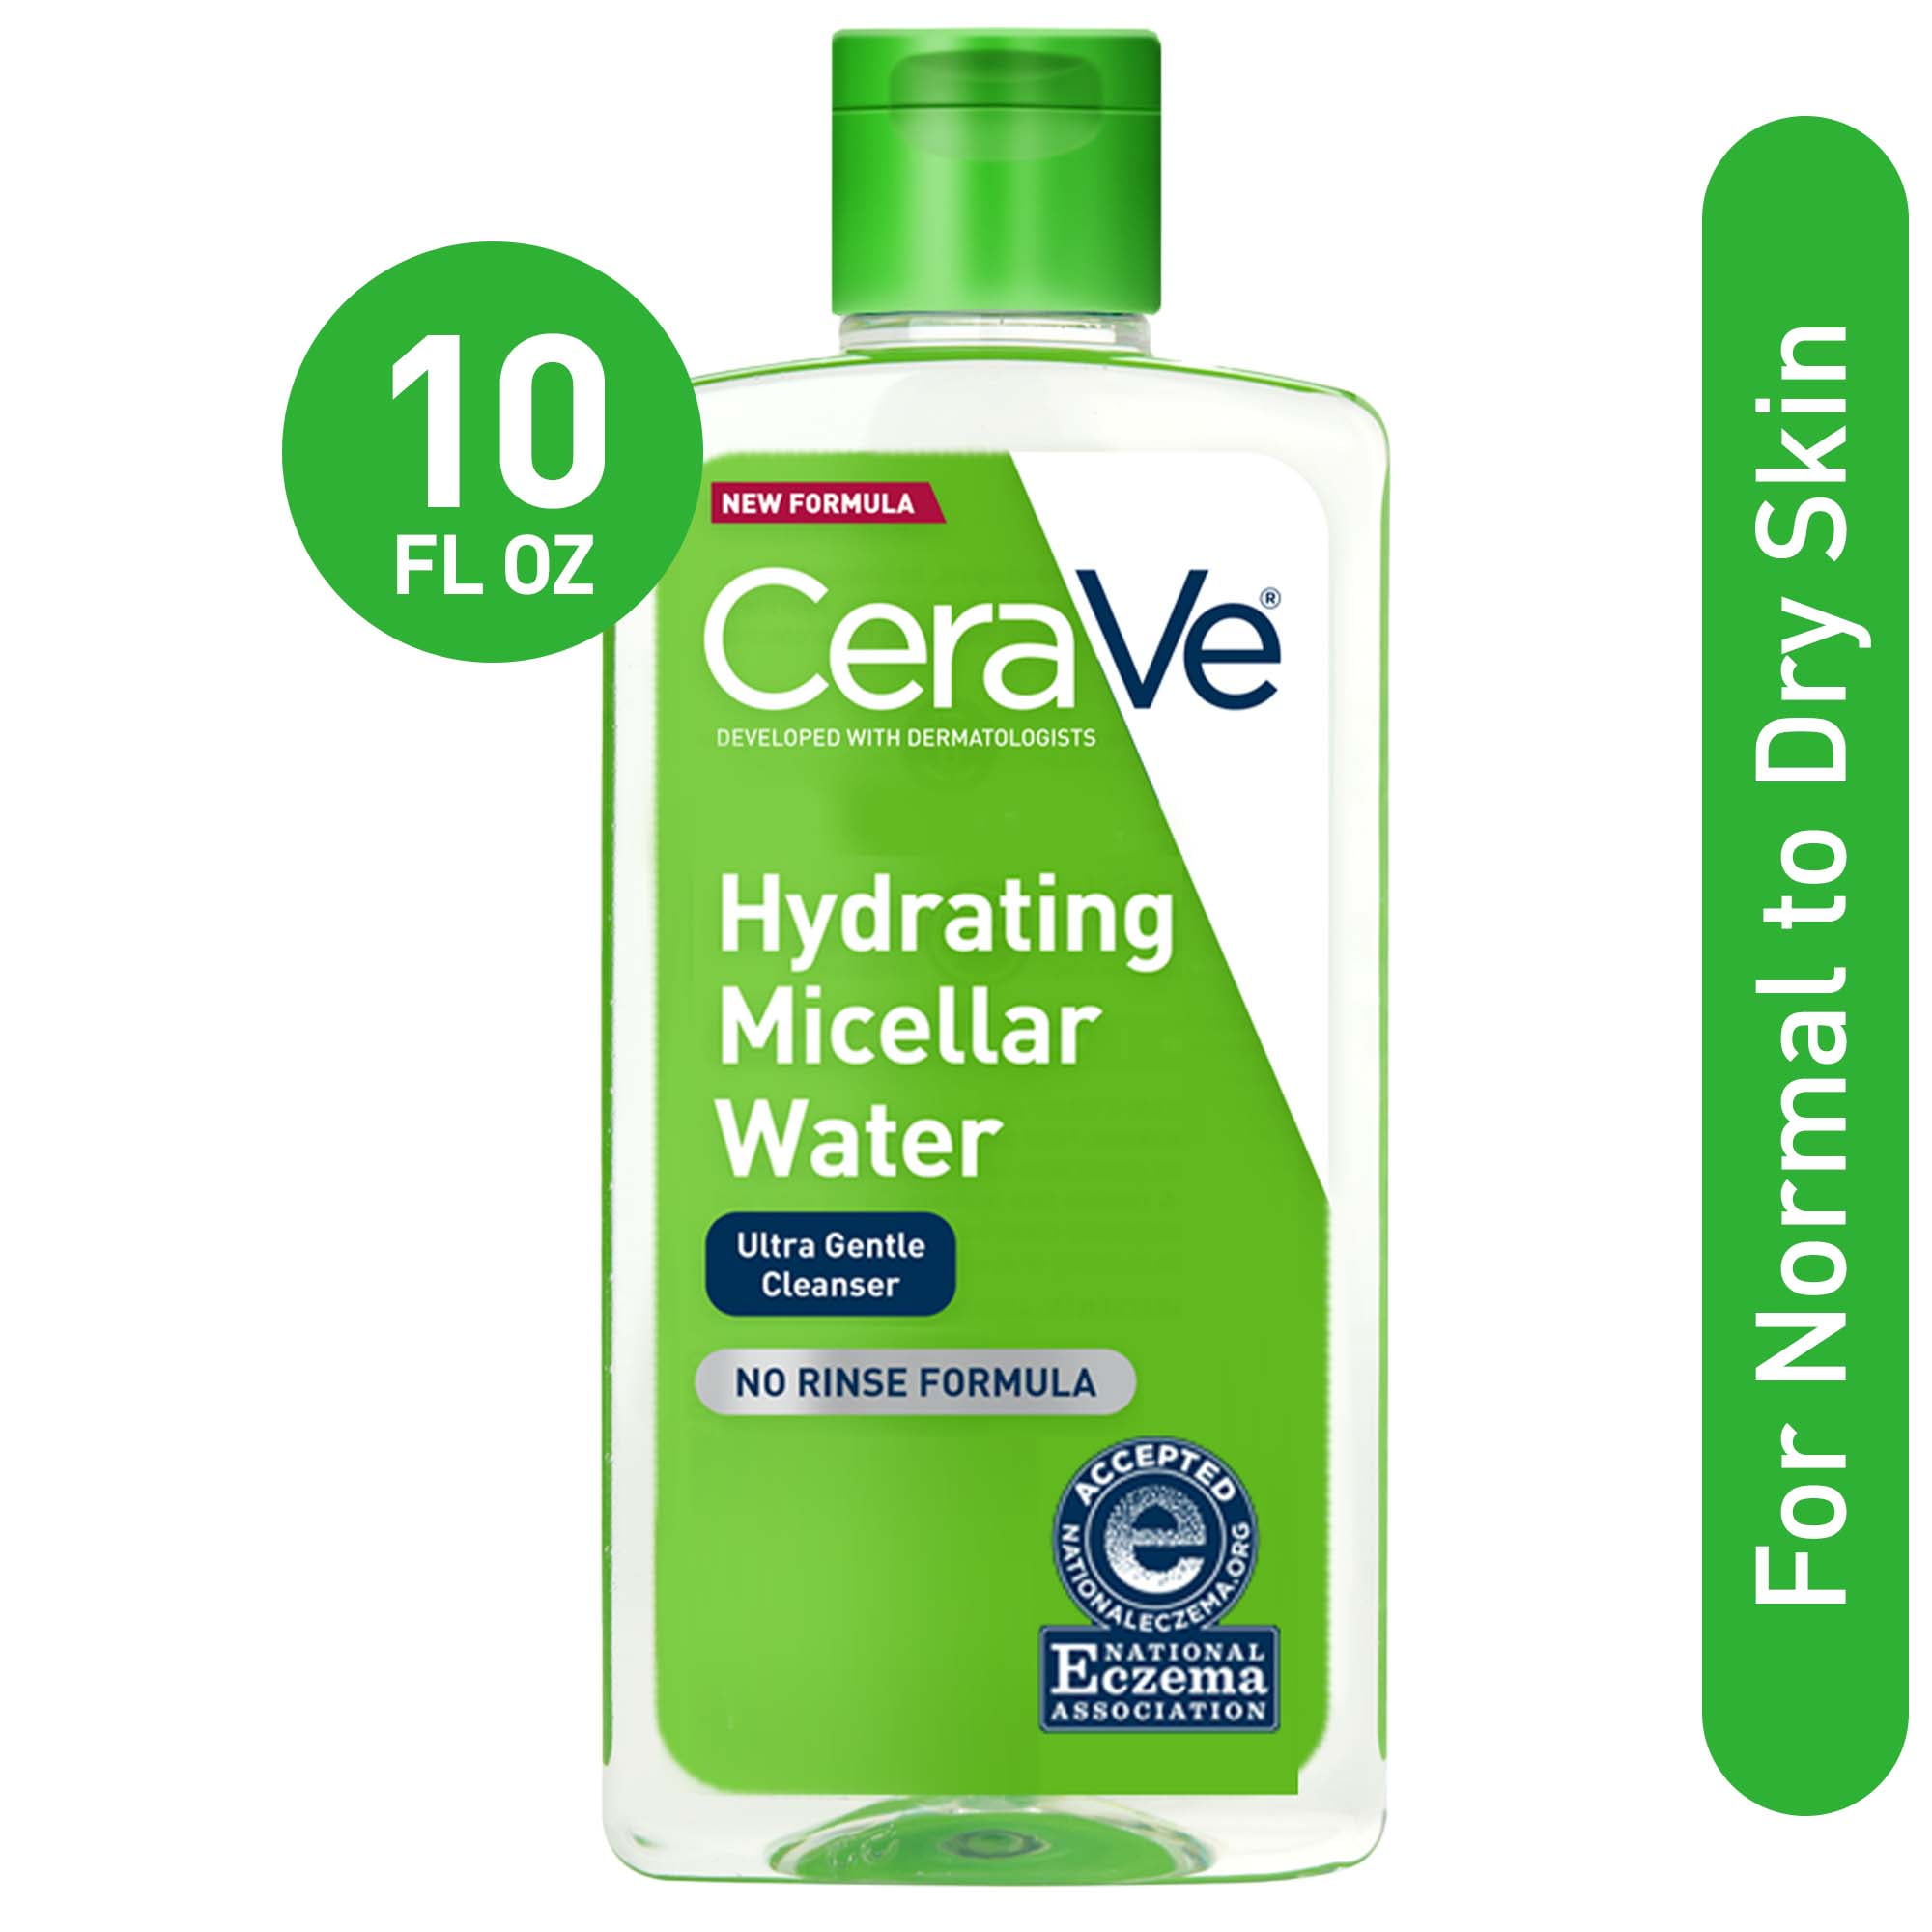 CeraVe Hydrating Micellar Water Facial Cleanser & Eye Makeup Remover, Fragrance Free & Non-Irritating, 10 fl oz